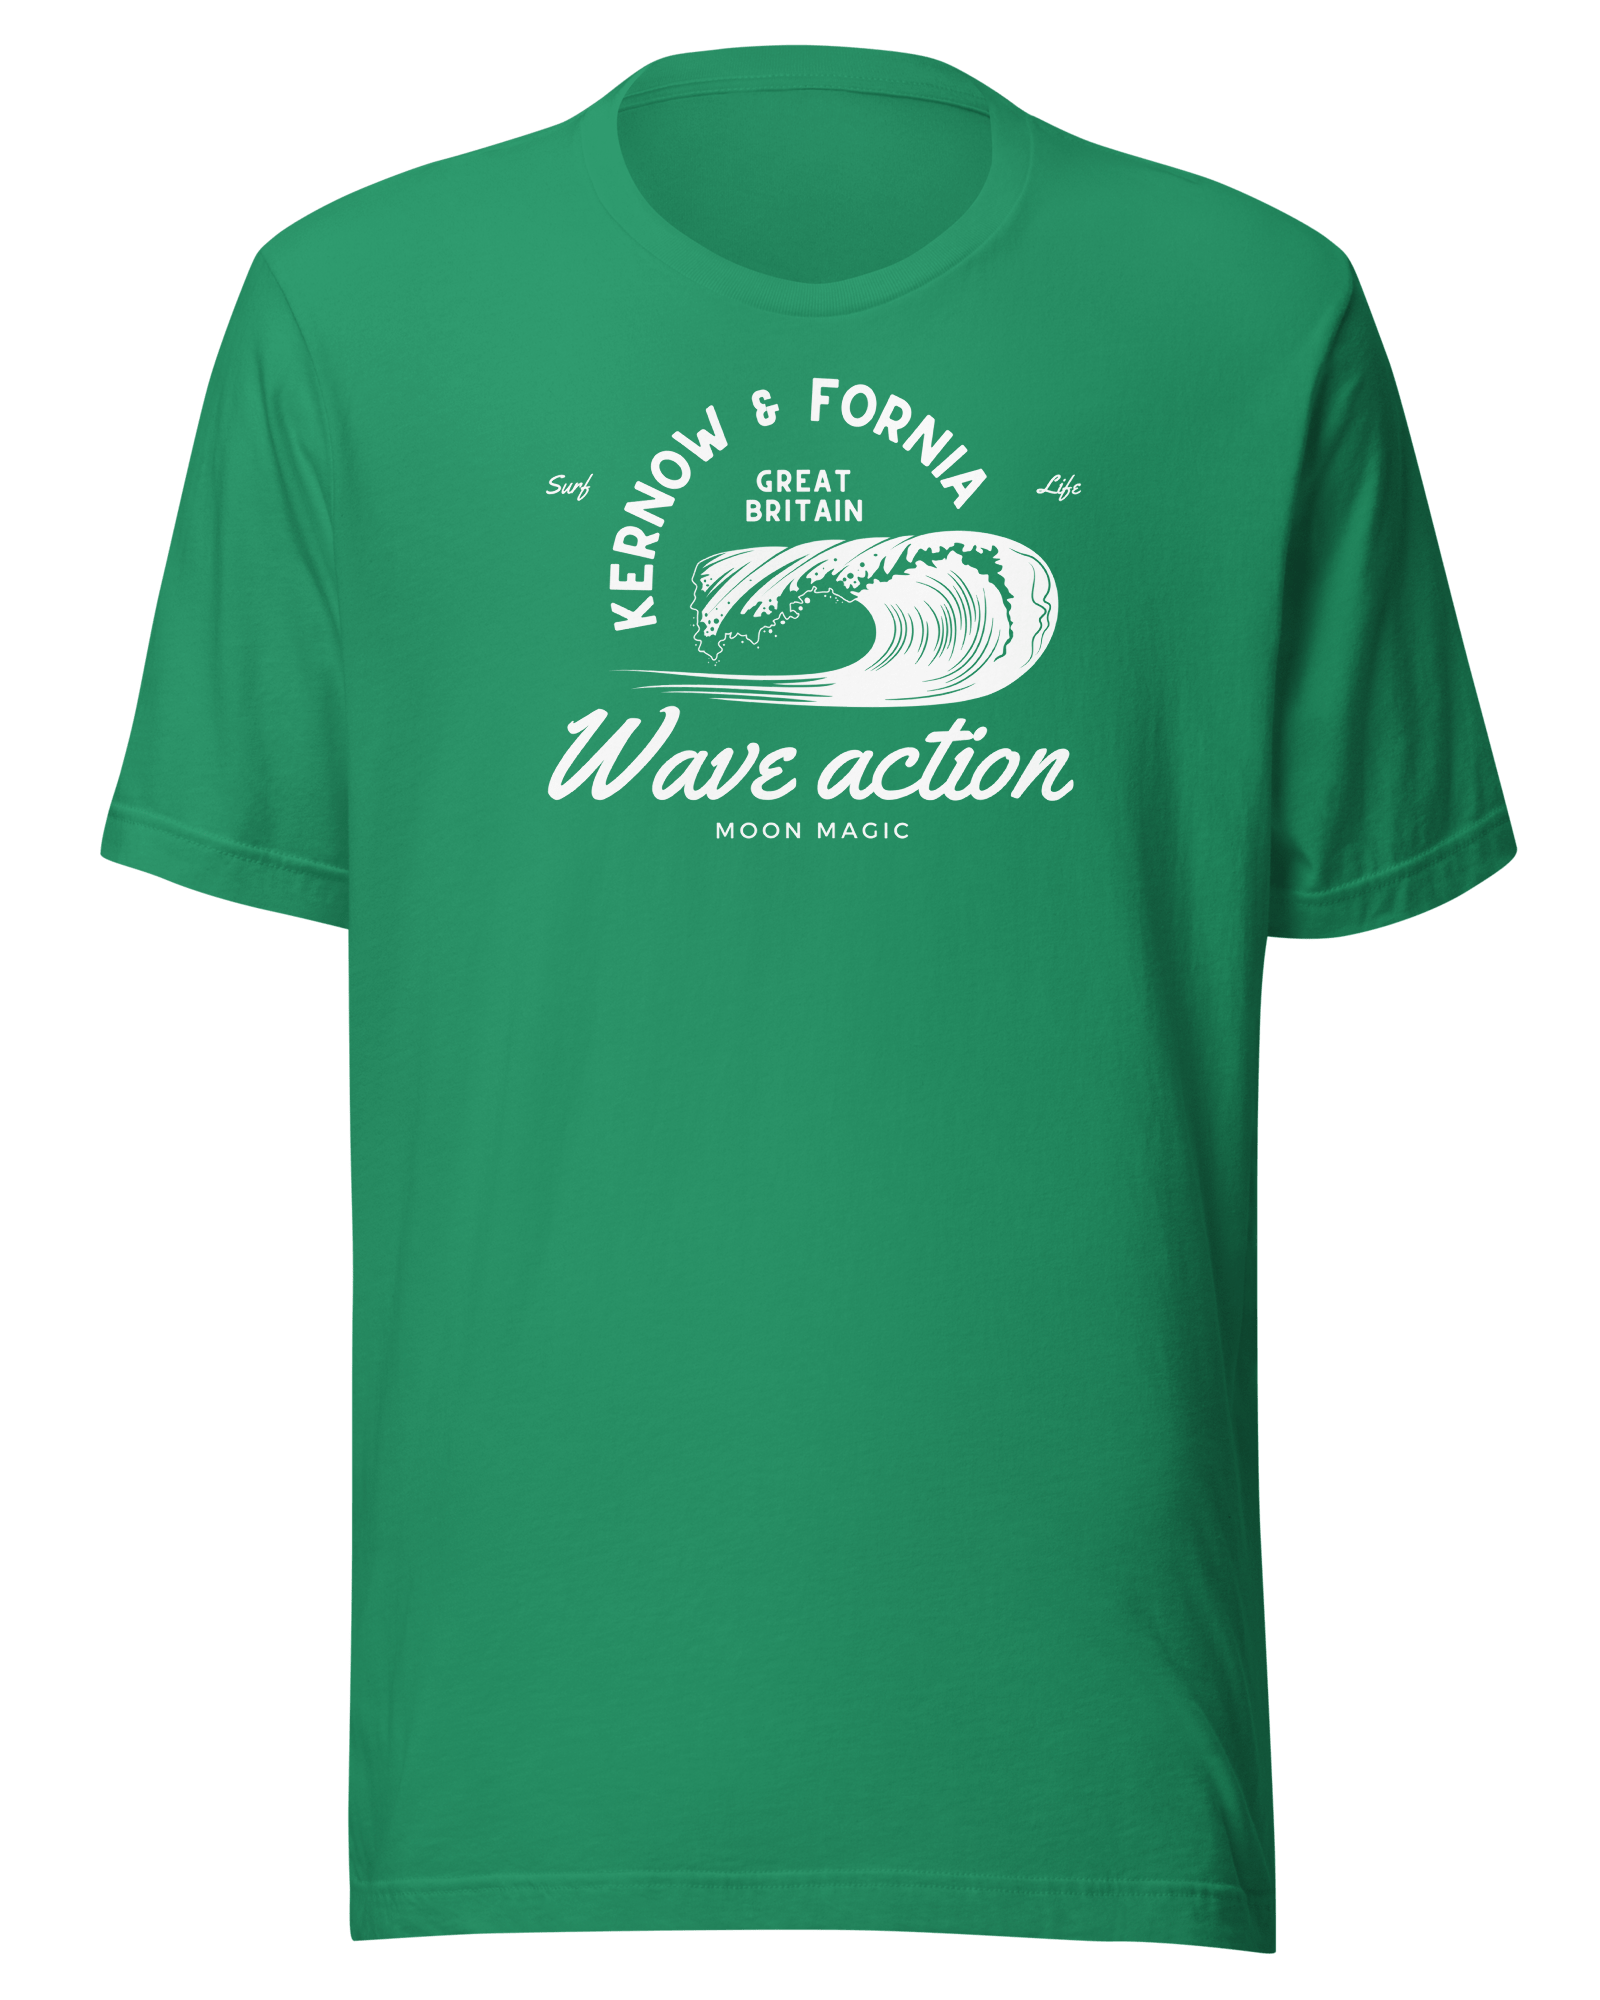 Kernow & Fornia Great Britain Wave Action T-shirt Kelly / S Shirts & Tops Jolly & Goode